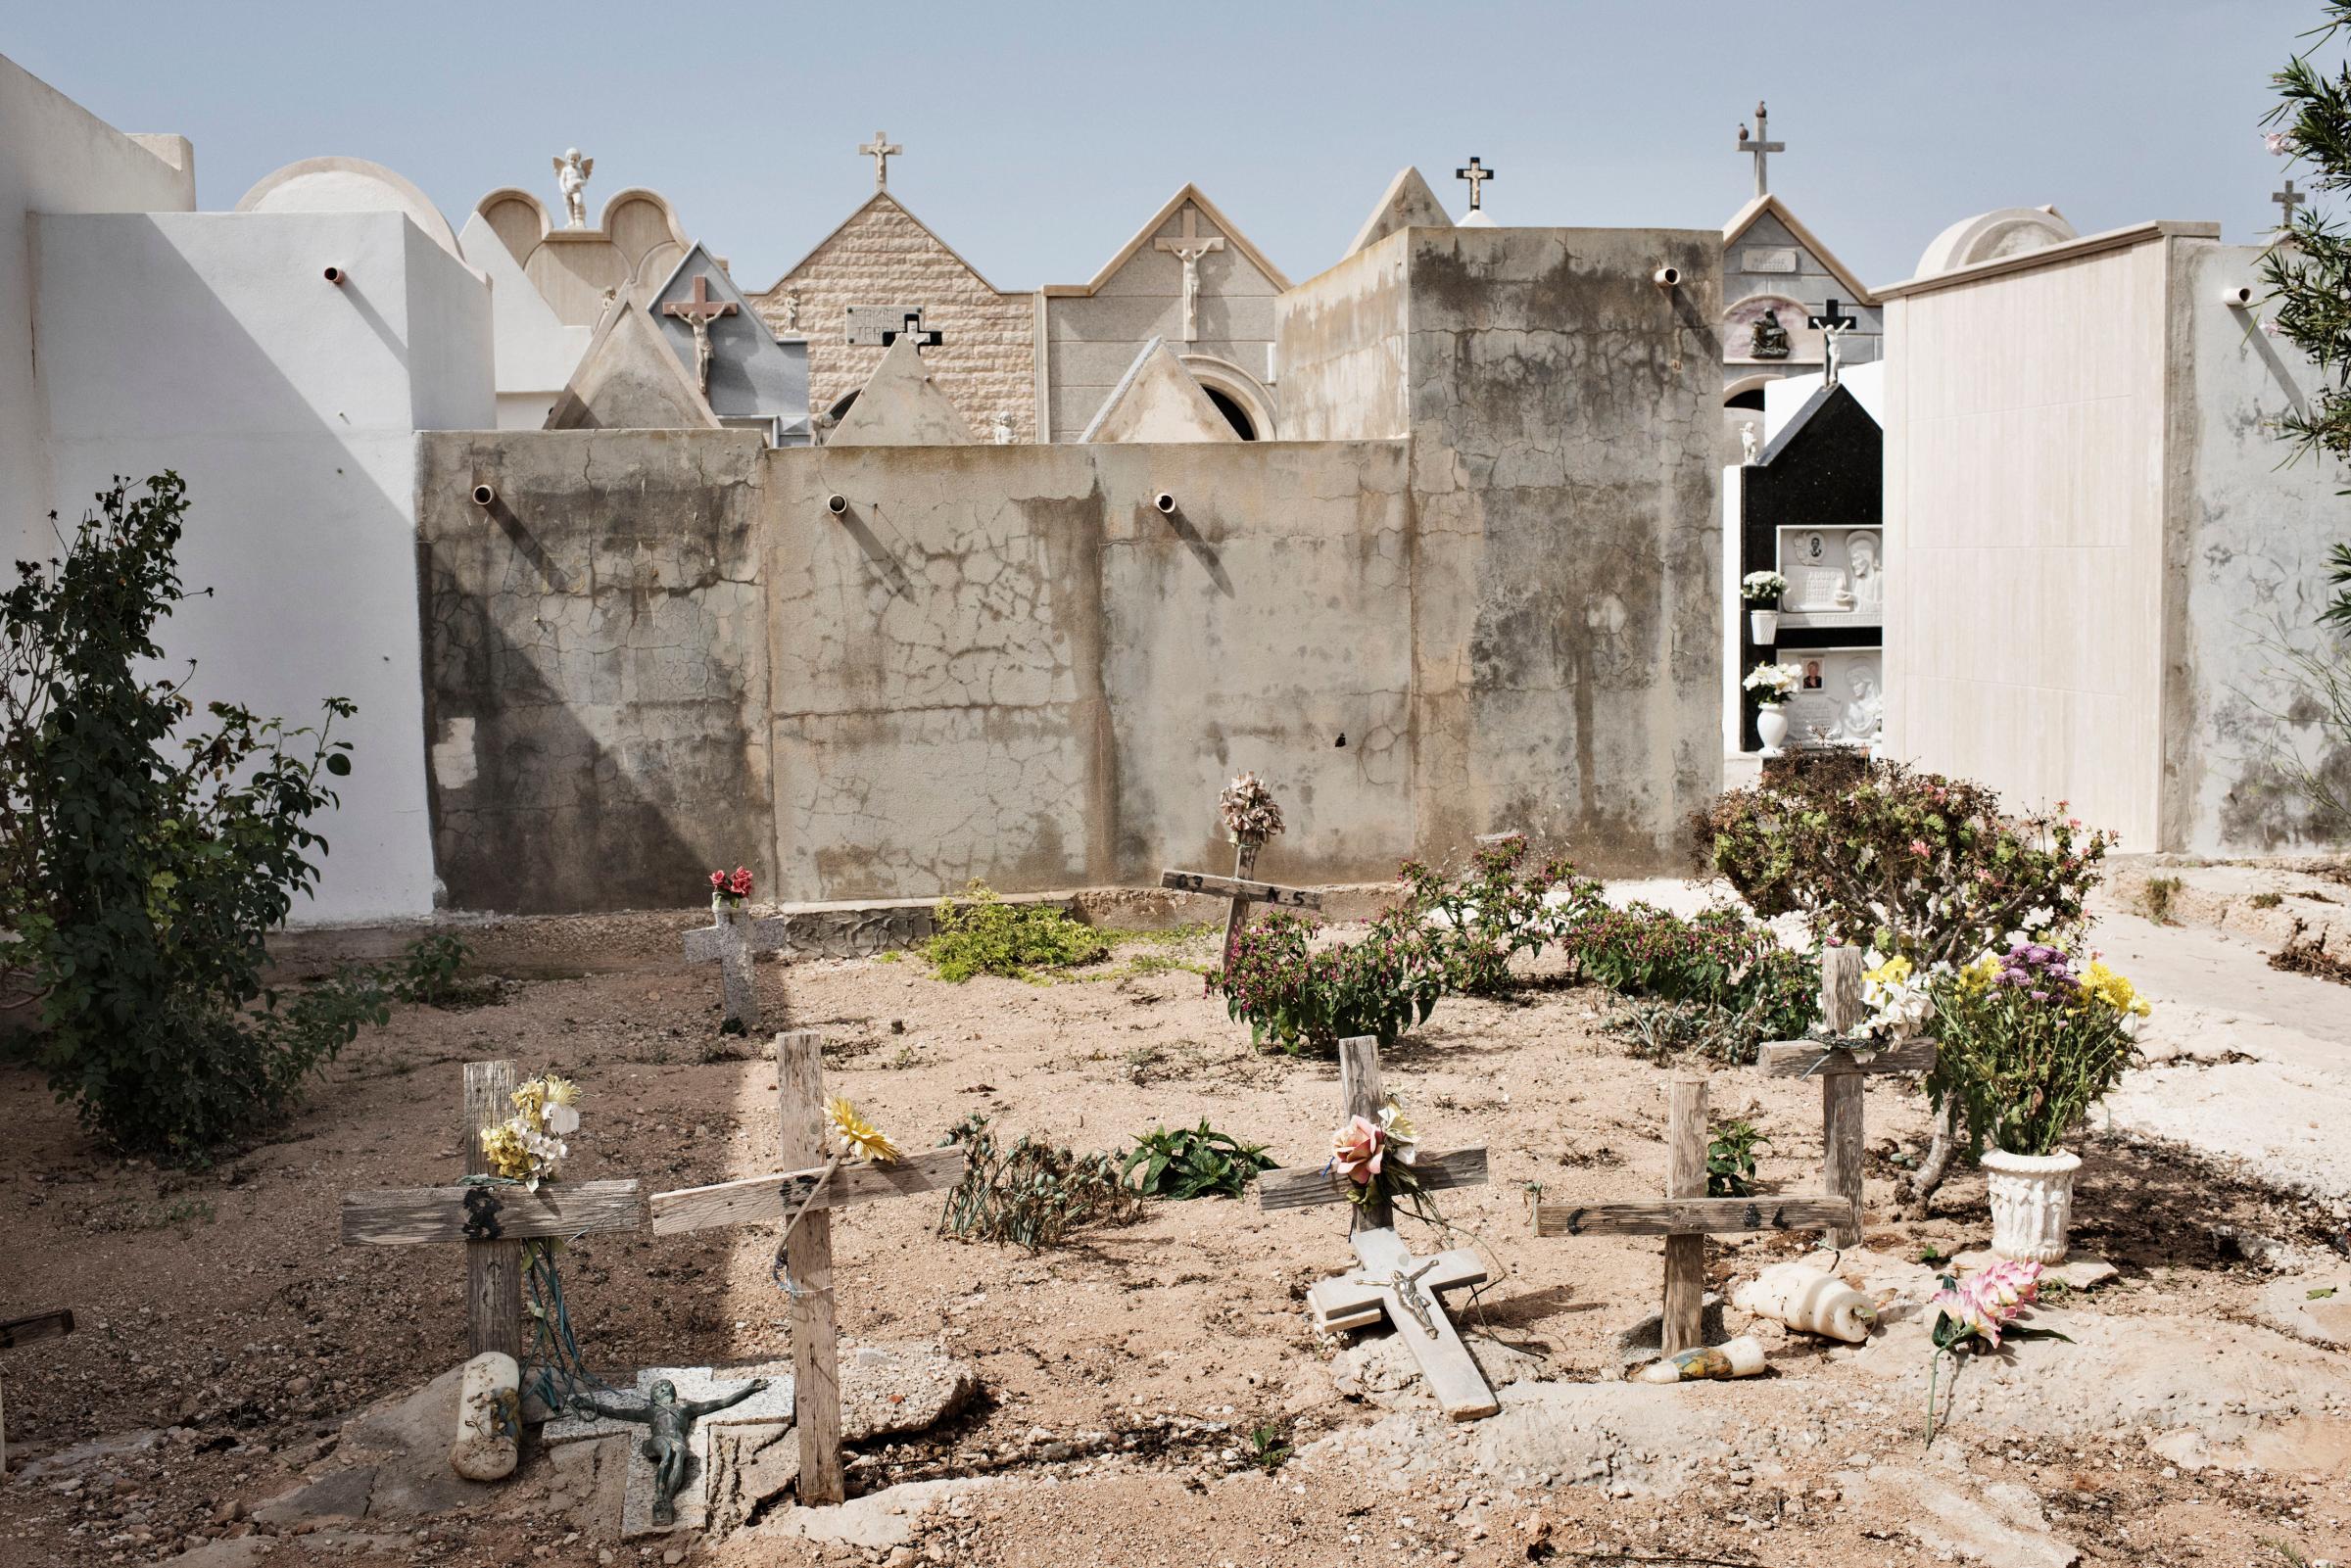 The nameless graves in the cemetery belong to unidentified migrants found dead on the beach of Lampedusa in Italy.